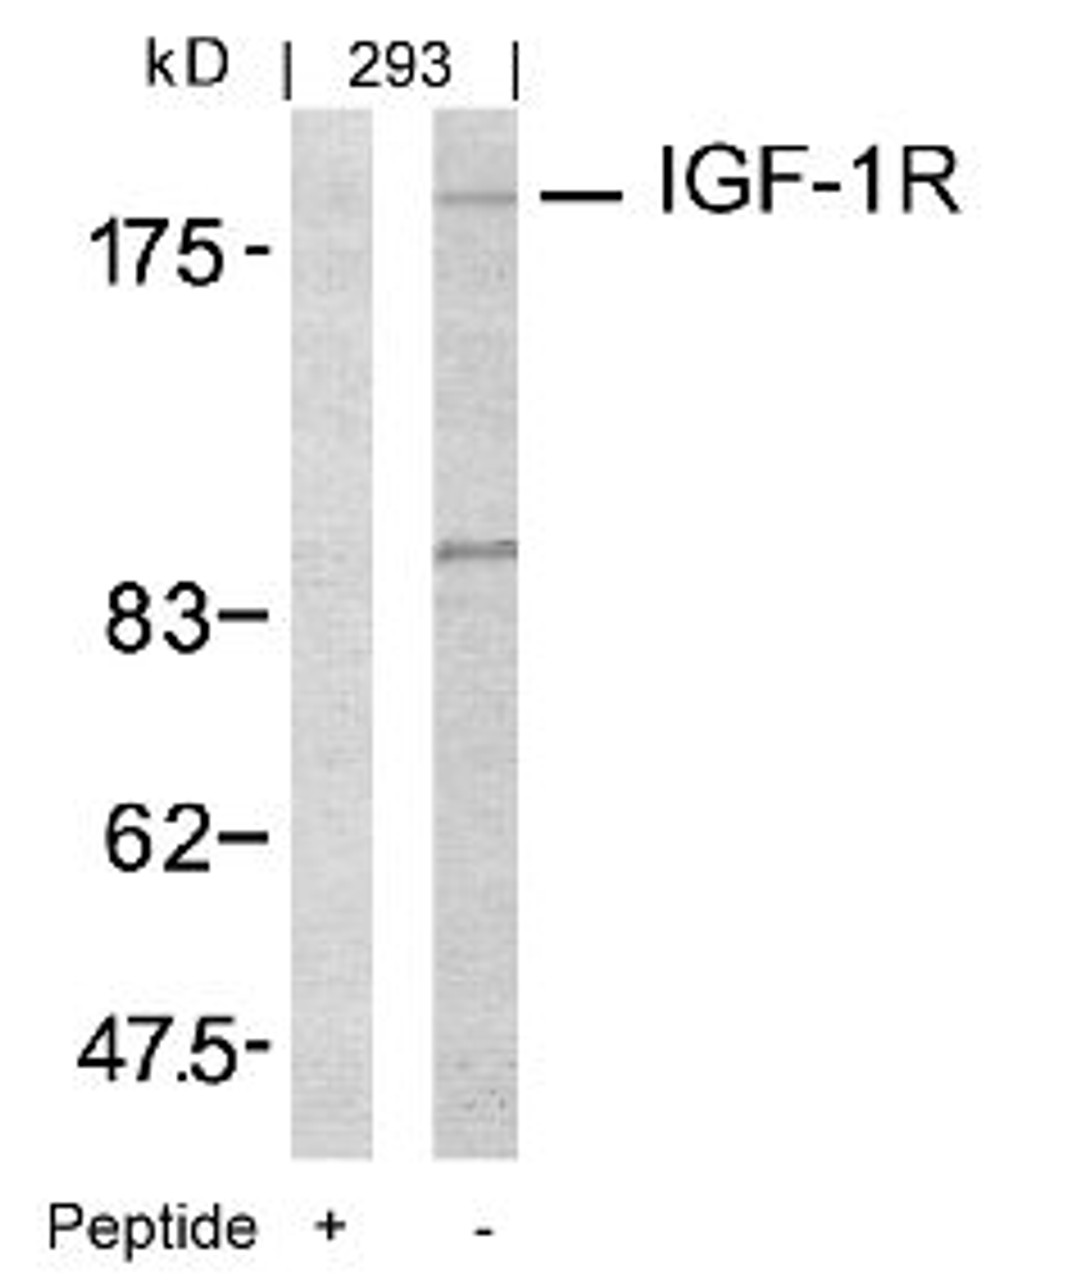 Western blot analysis of lysed extracts from 293 cells using IGF-1R (Ab-1161) .